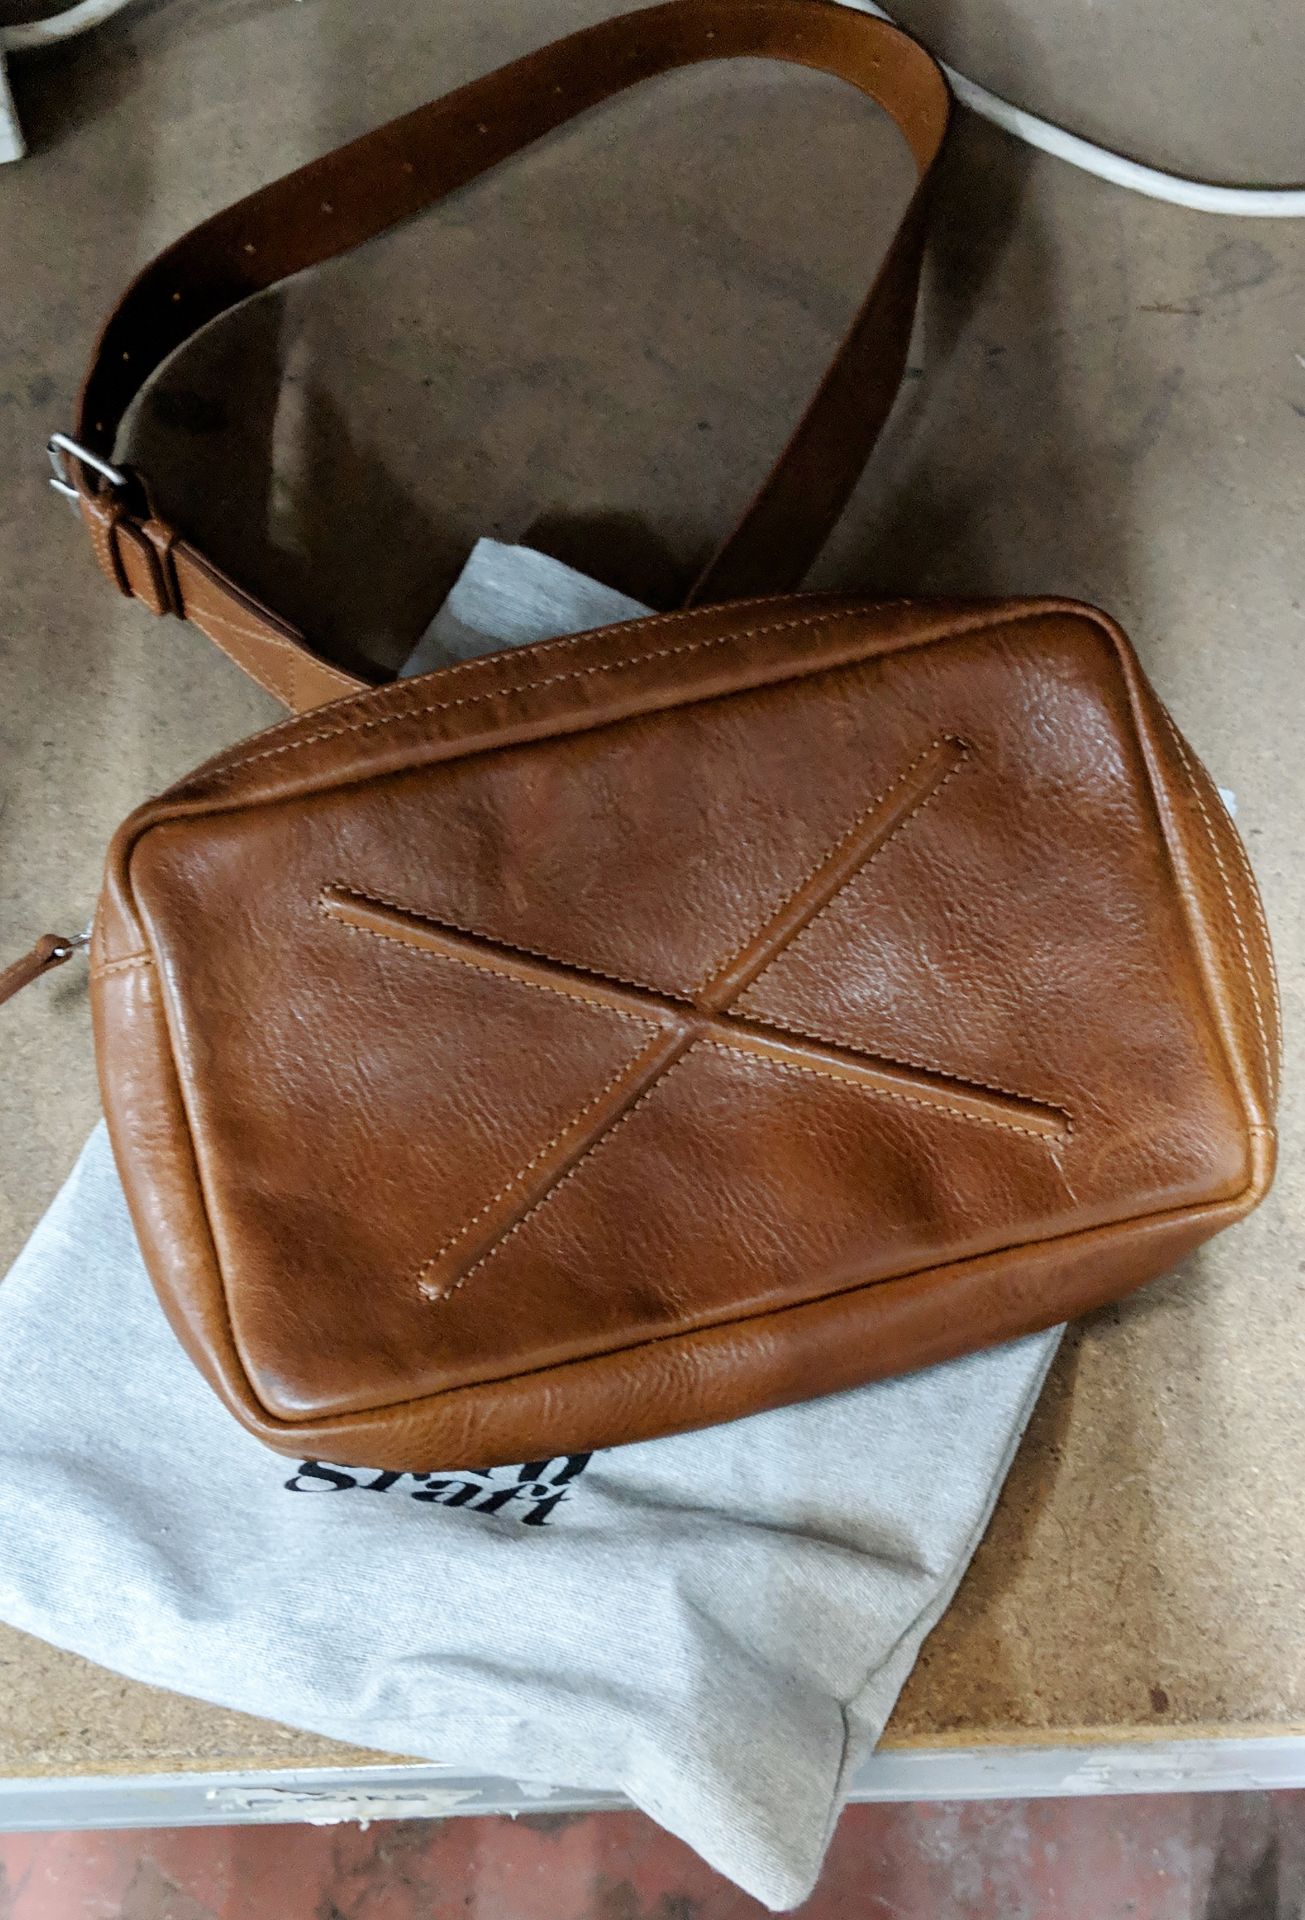 Hard Graft leather "Phone Pack Classic" man bag in brown leather with adjustable strap, including - Image 2 of 8